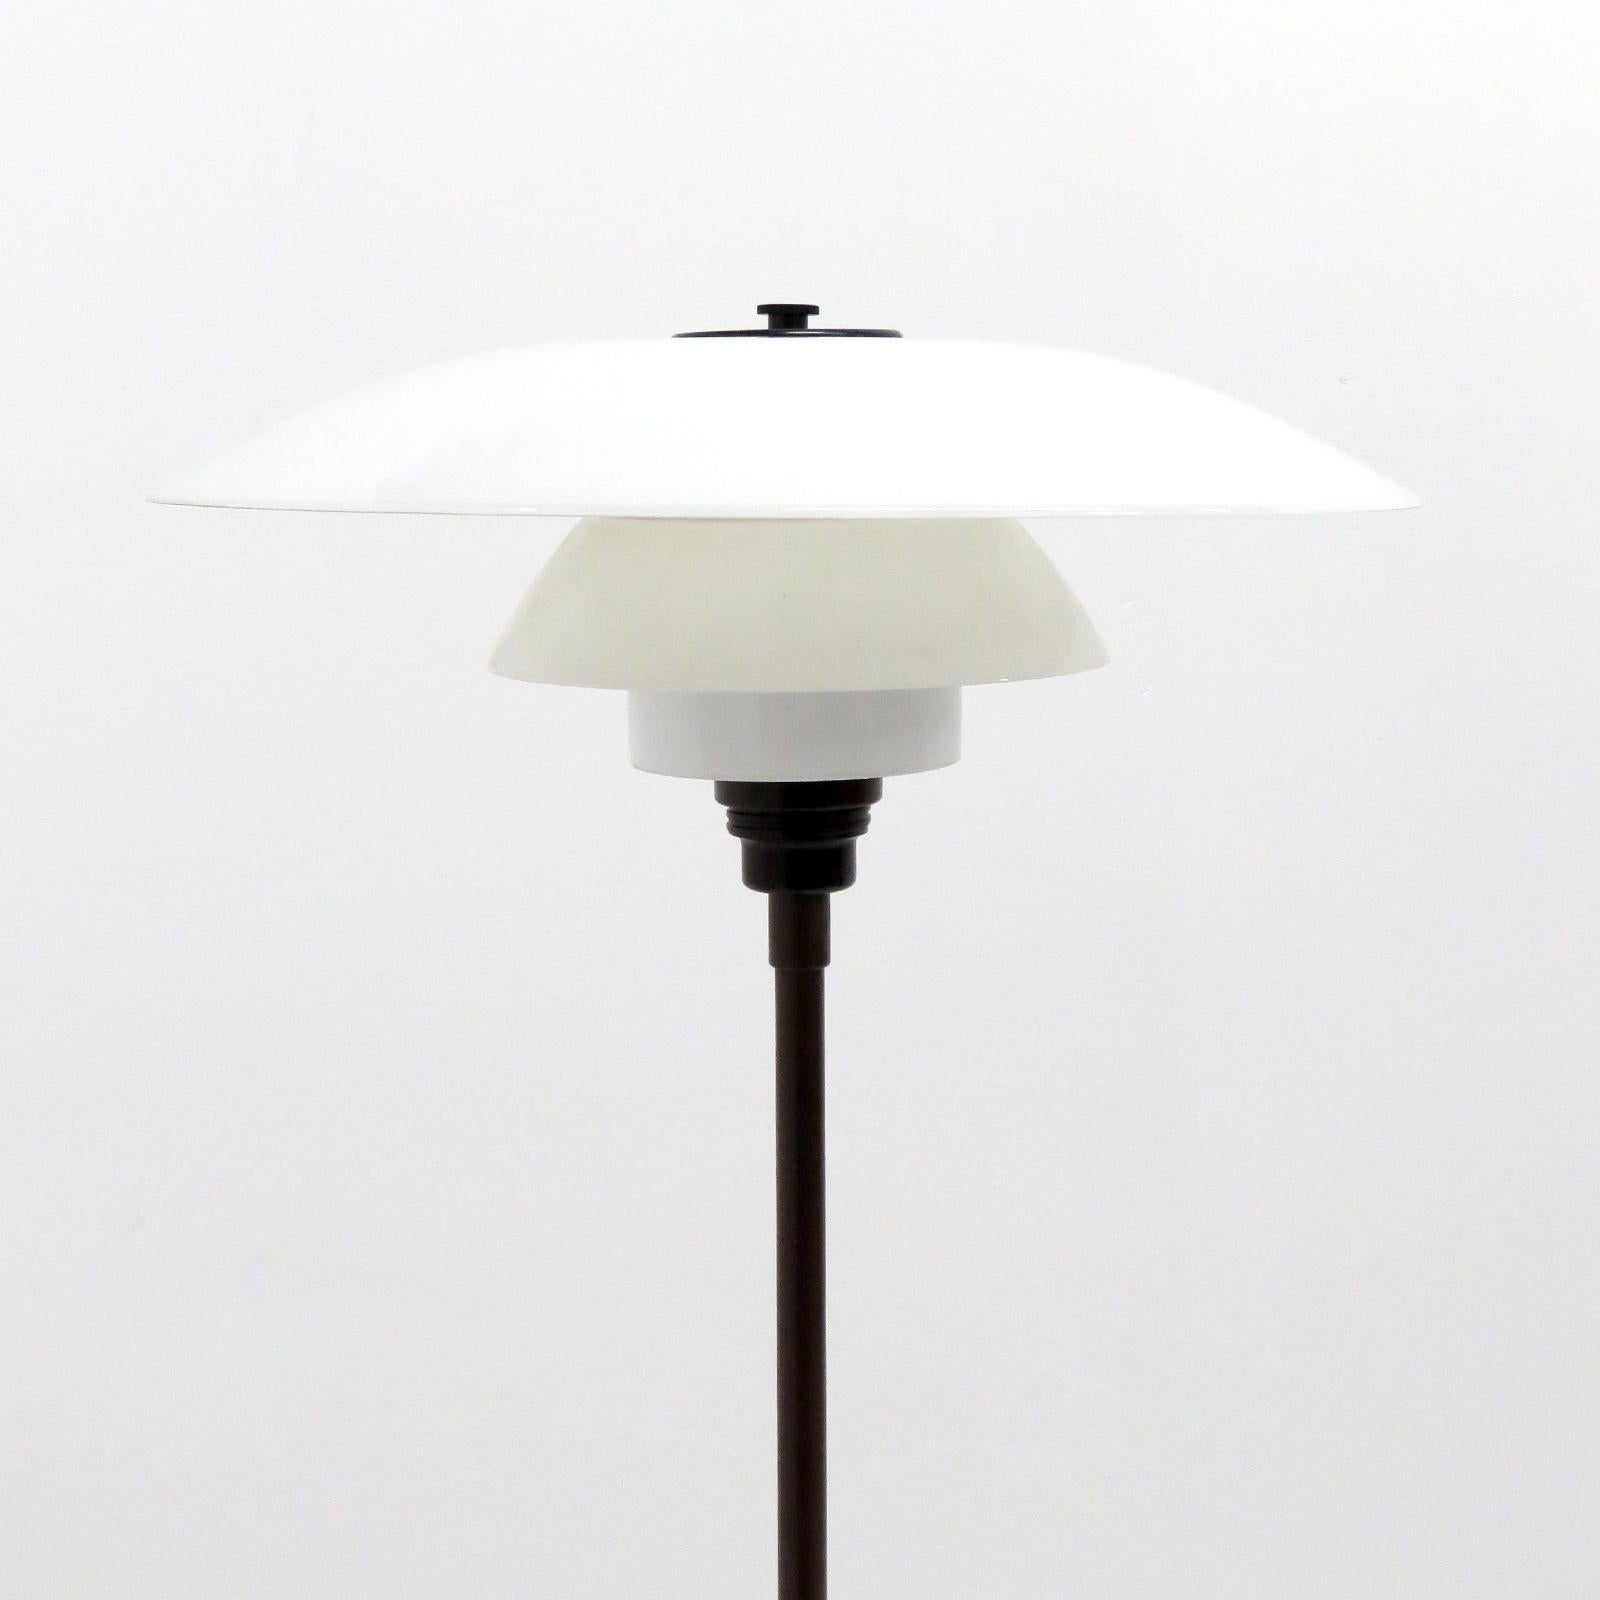 Rare, early floor lamp by Poul Henningsen for Louis Poulsen with two layer opaline glass PH 4/3 shade set, bakelite socket and cover plate. The lamp is wired for US standards with brown cloth cord and a foot switch, one E27 socket, max. wattage